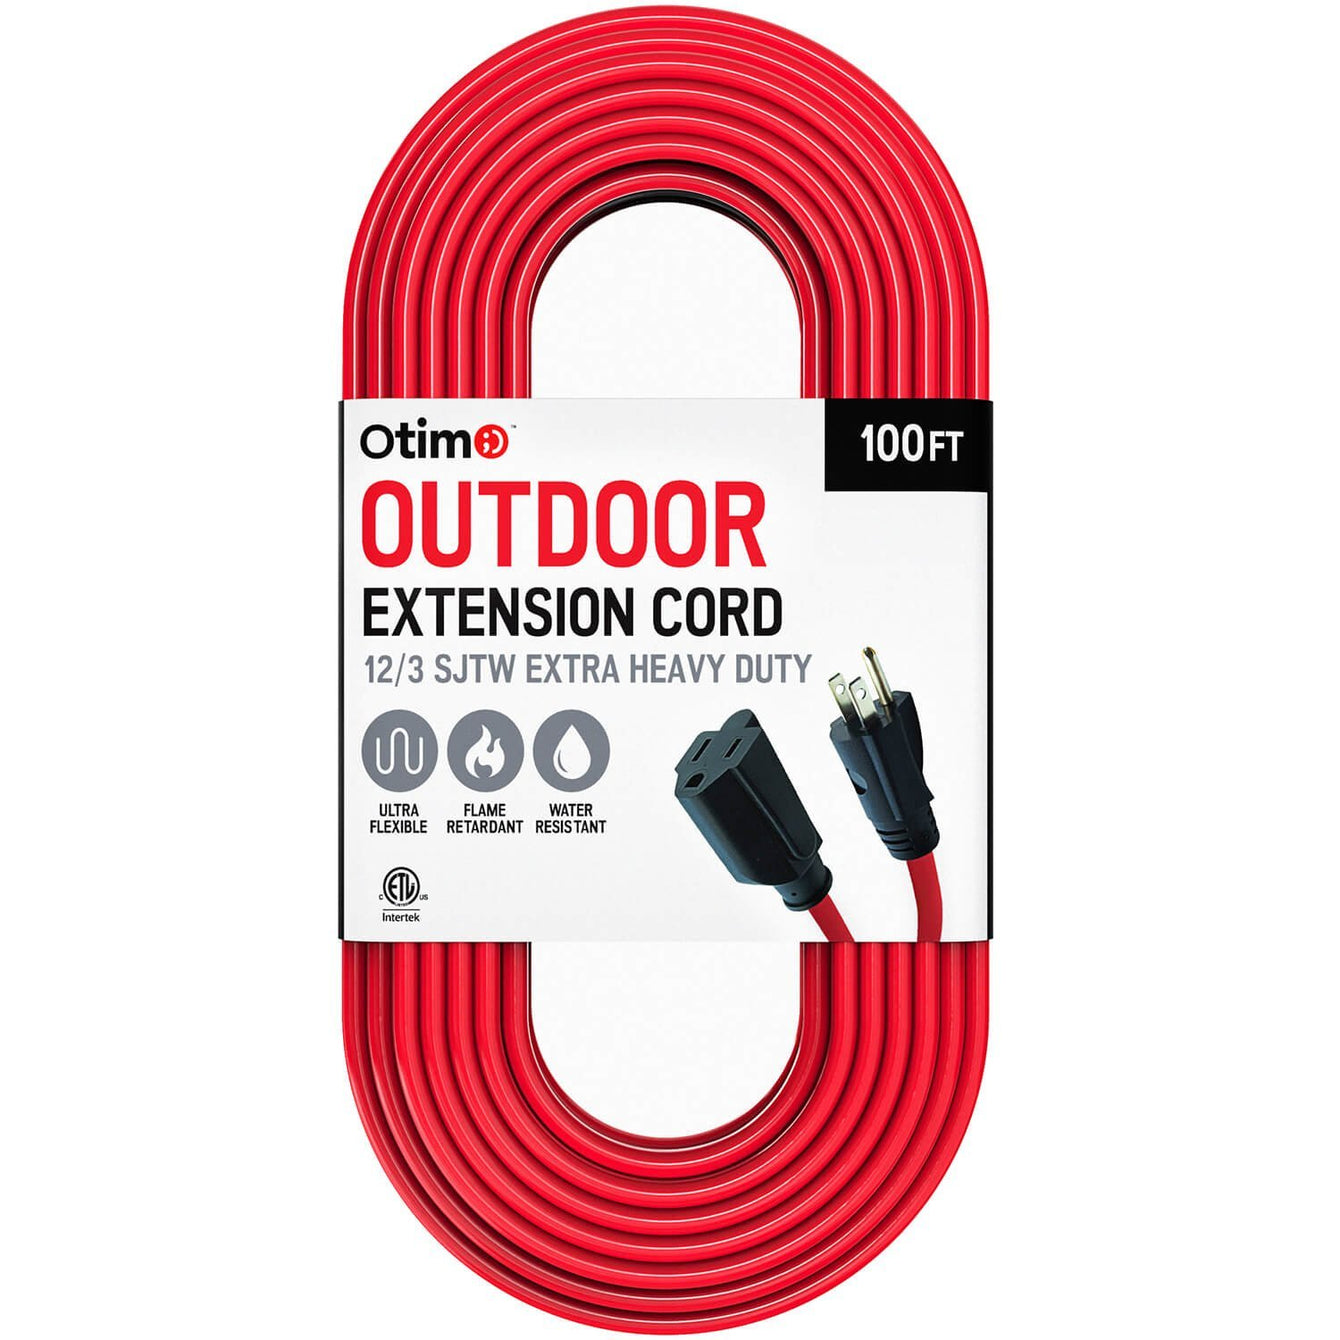 Otimo 100 ft 12/3 Outdoor Extra Heavy Duty Extension Cord - 3 Prong Extension Cord, Red